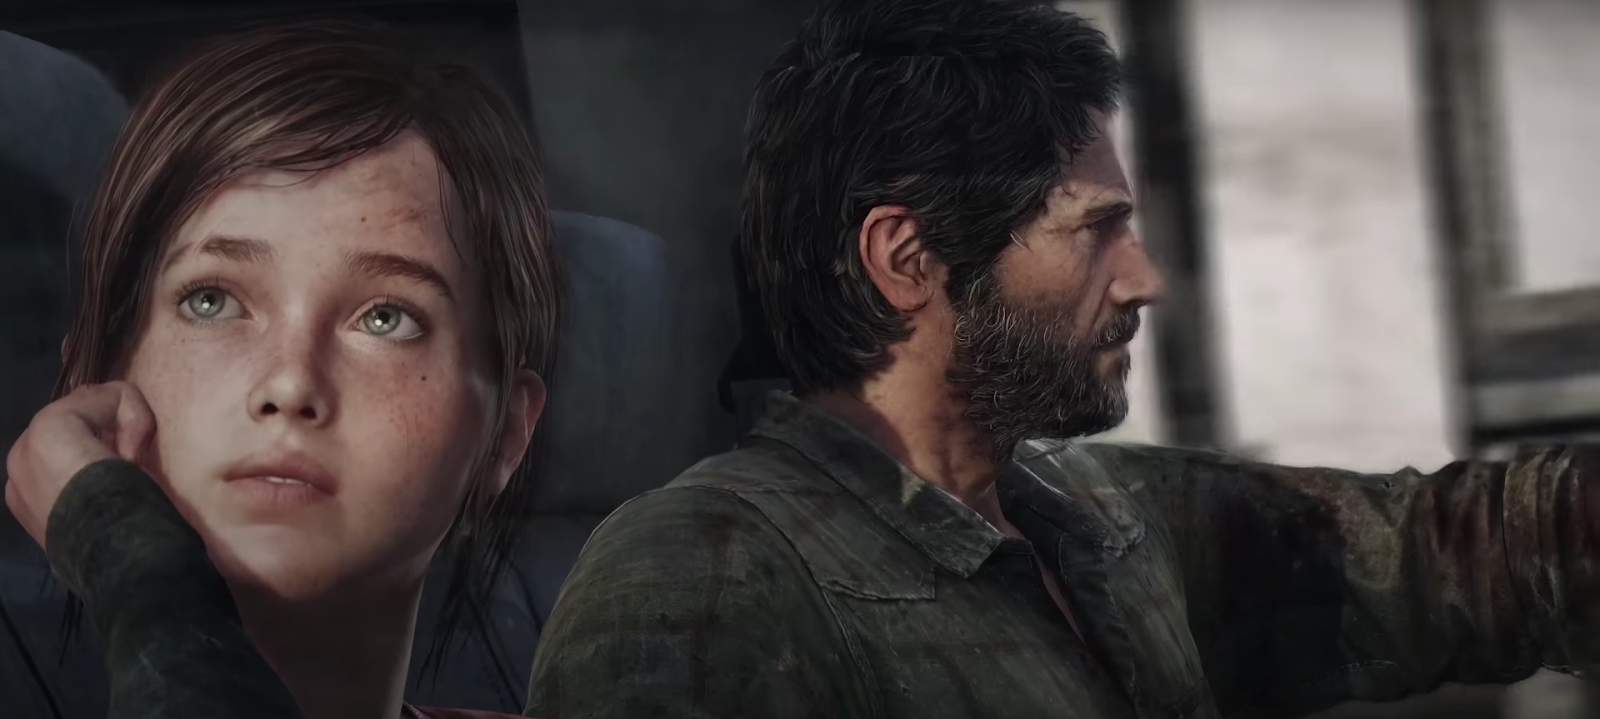 An in game screenshot of Joel and Ellie from The Last of Us game. 